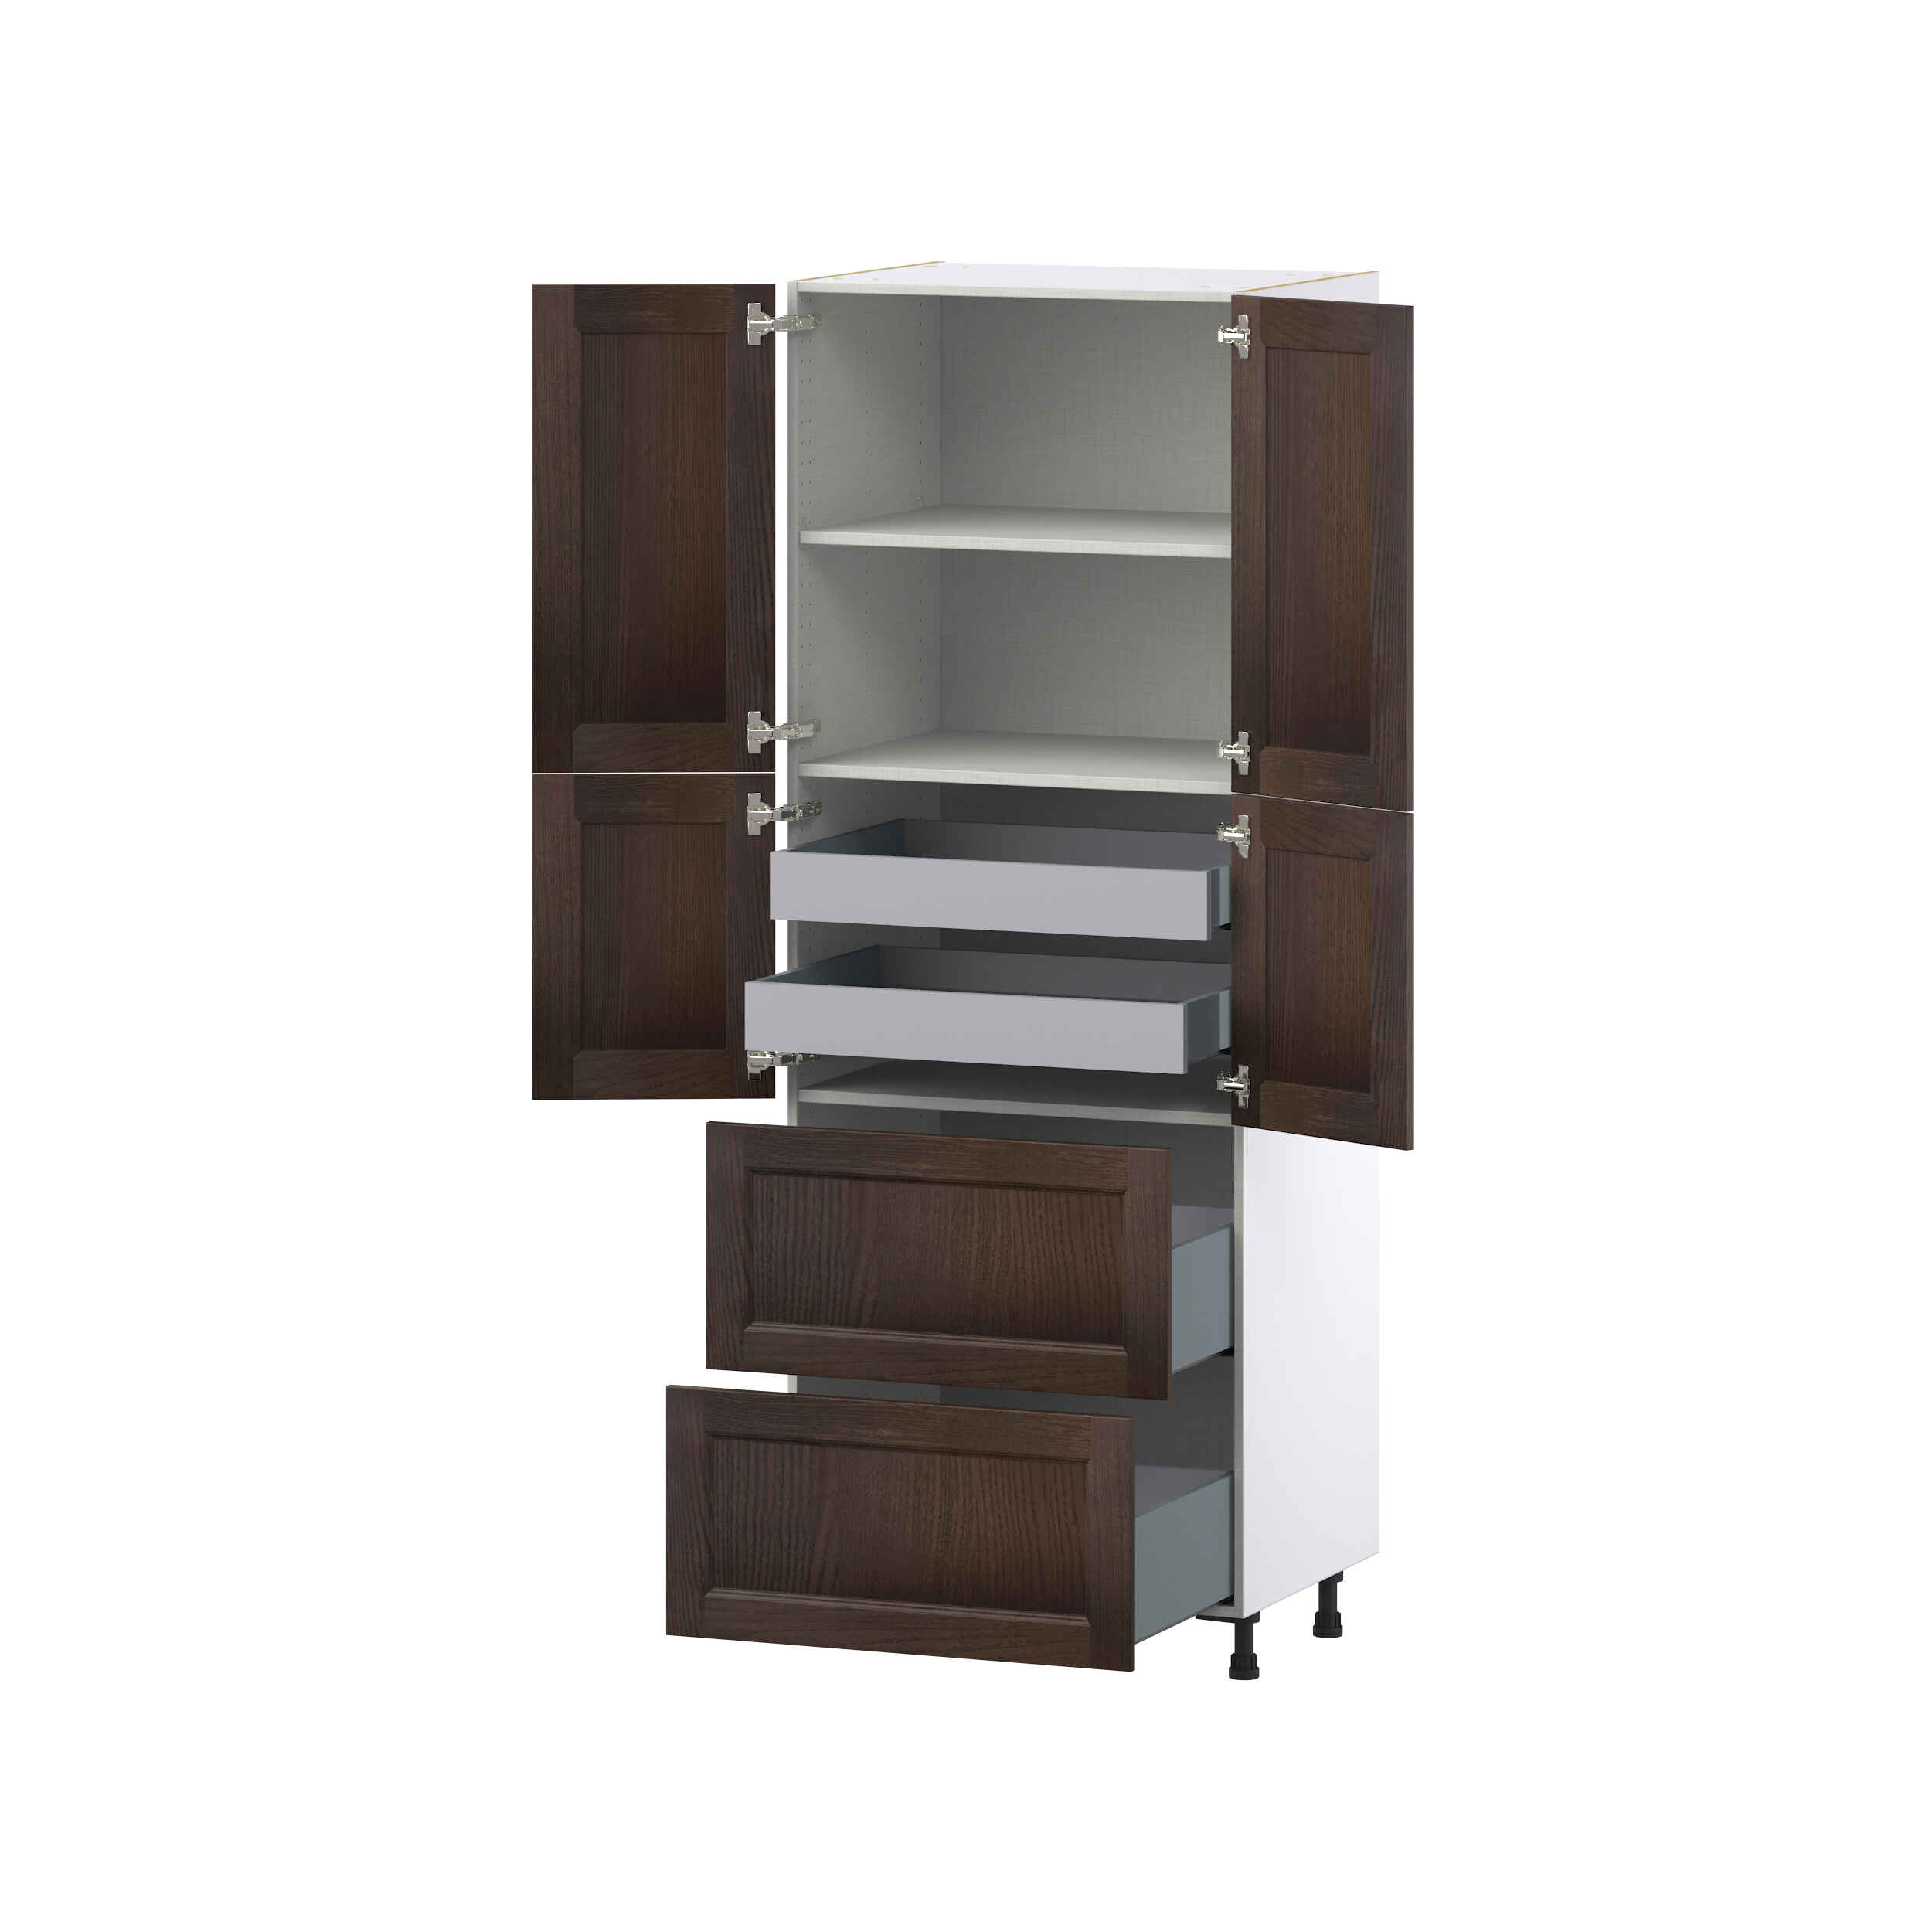 Summerina Chestnut Solid Wood Recessed Assembled Pantry Cabinet 4 Doors with 2 Drawers and 2 Inner Drawers (30 in. W X 84.5 in. H X 24 in. D)